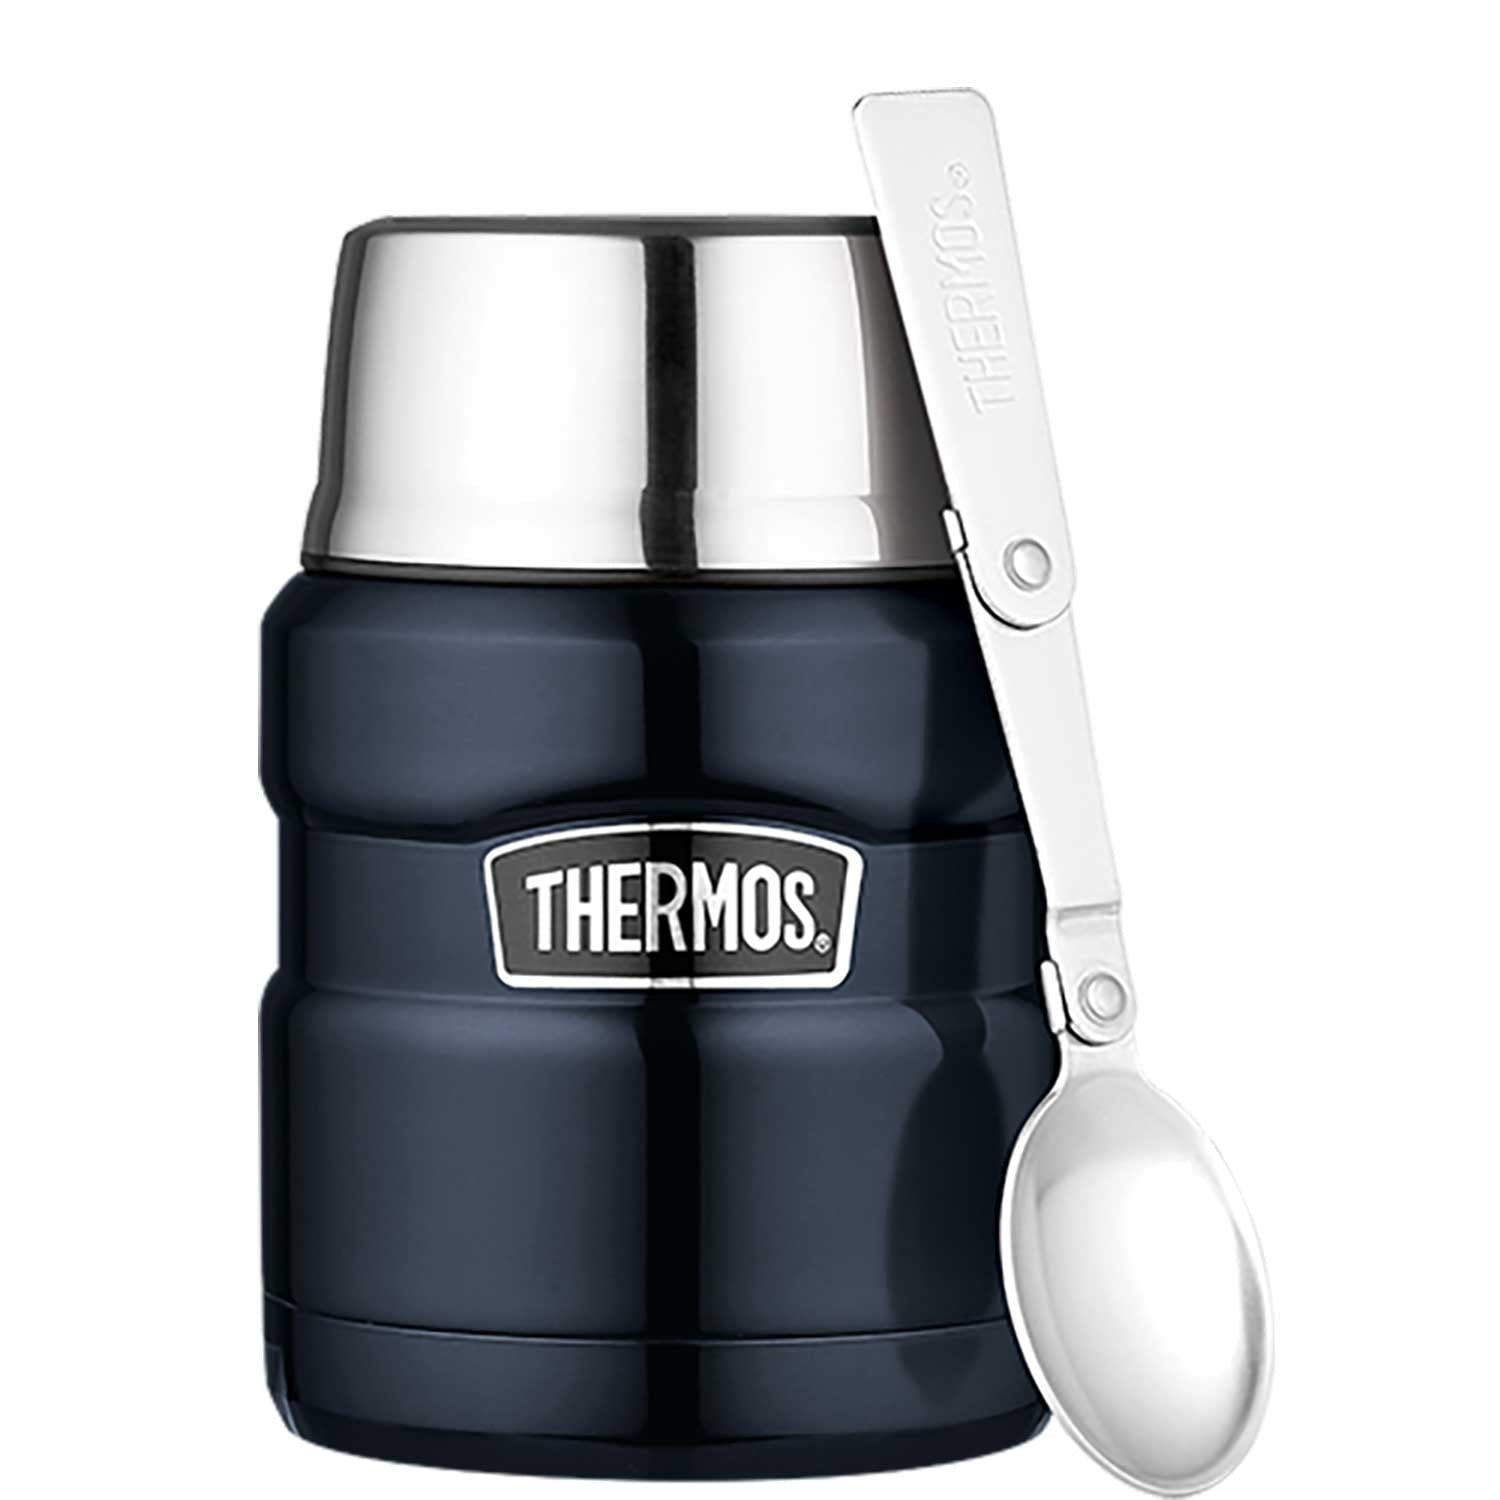 https://cdn.shopify.com/s/files/1/1416/1268/products/thermos-stainless-king-vacuum-insulated-food-jar-470ml-midnight-blue-30853282247.jpg?v=1648174018&width=1500